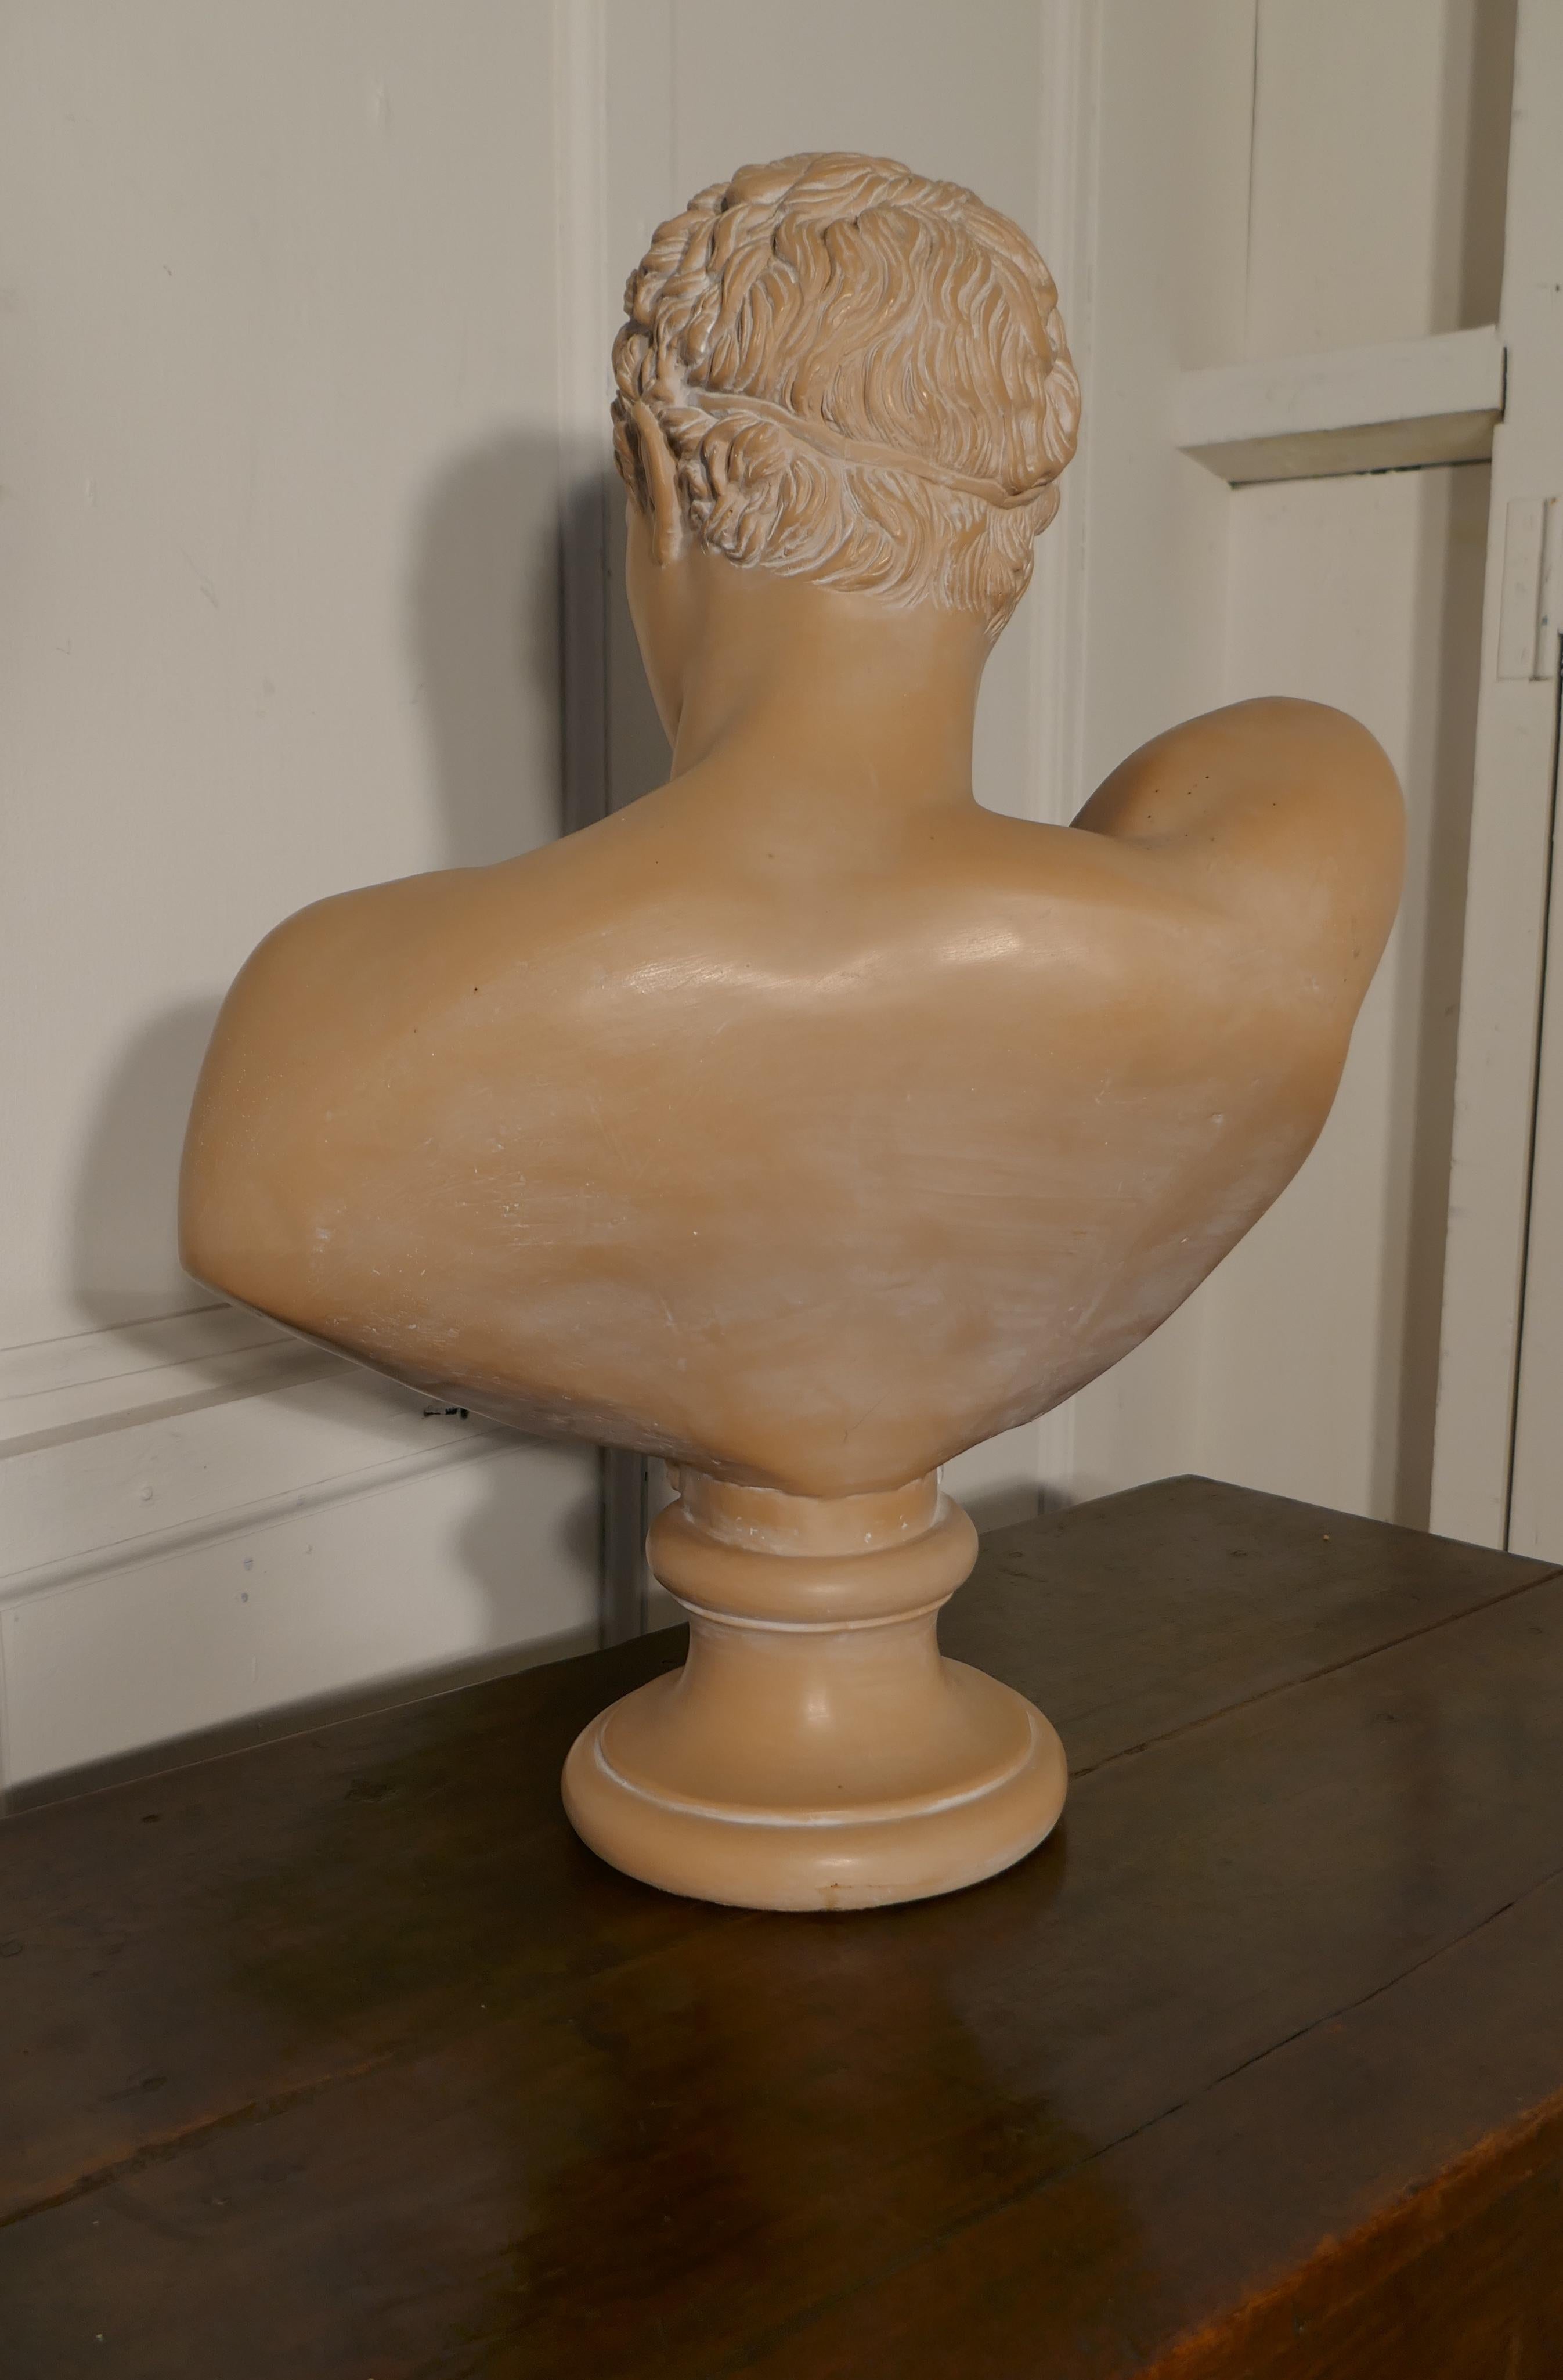 large bust statue